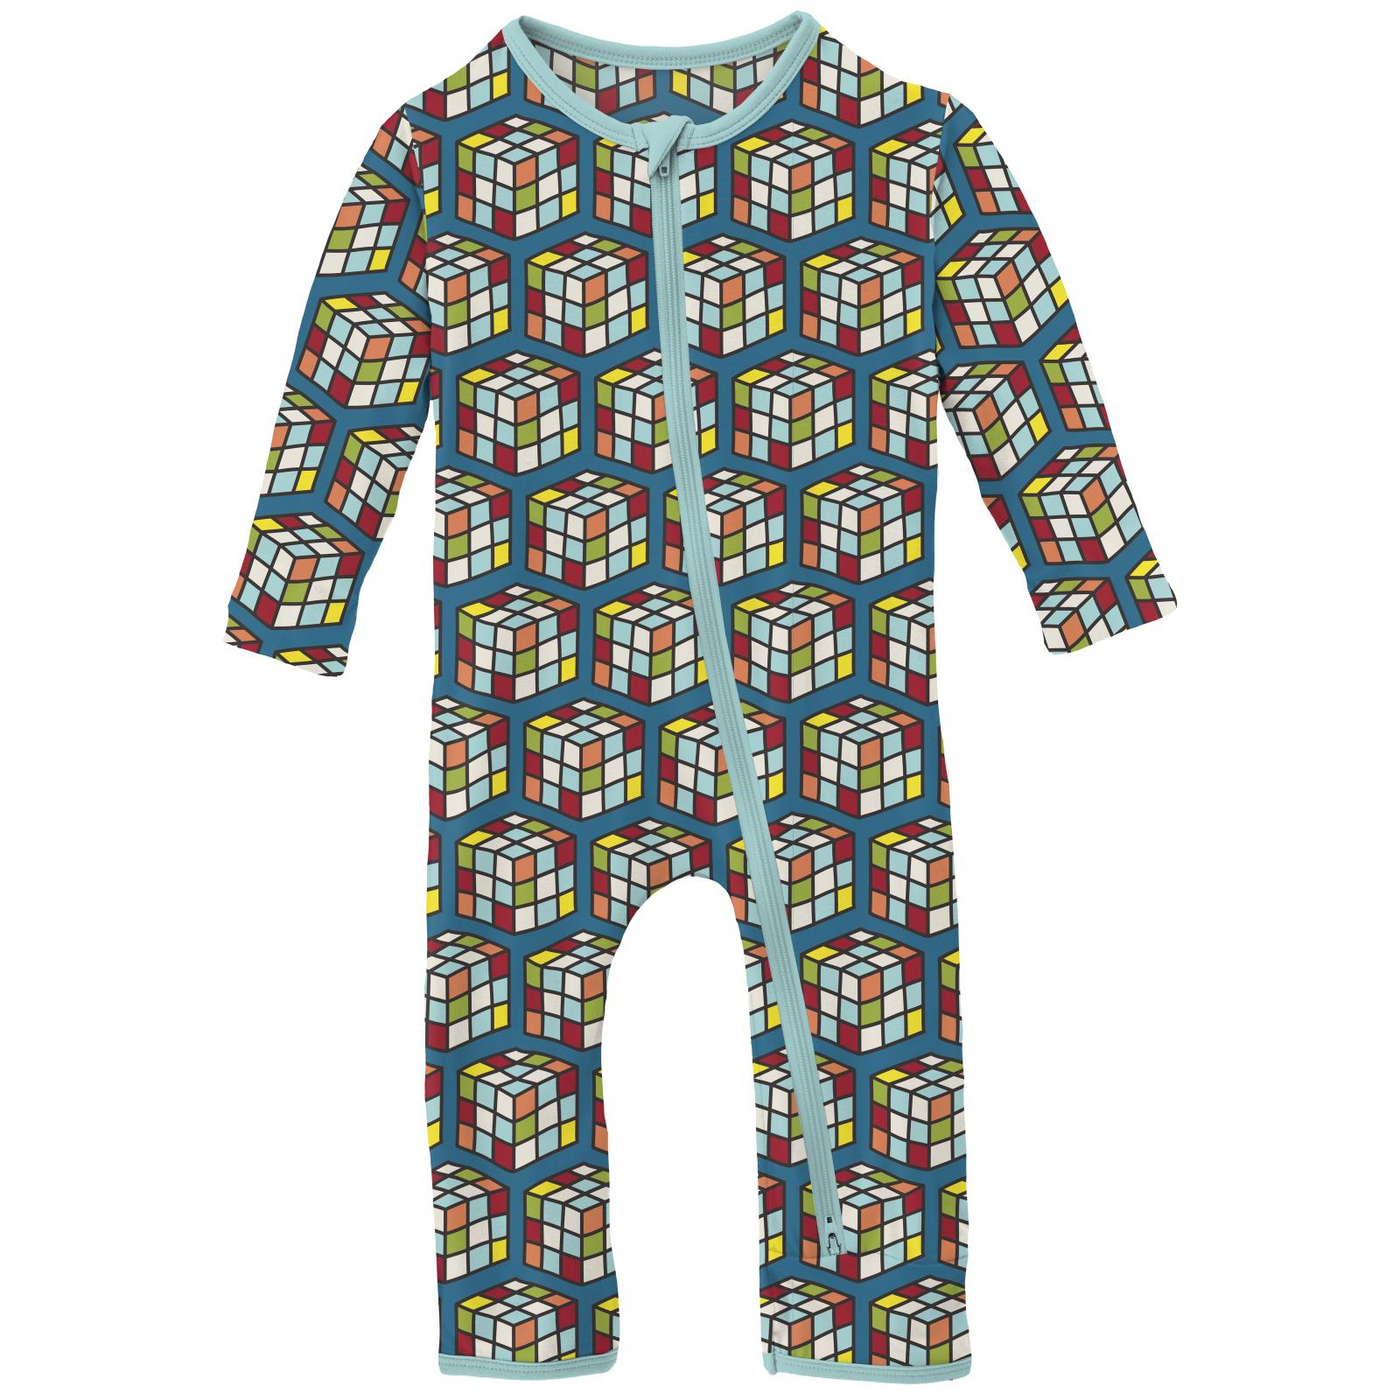 Kickee Pants Coverall with 2 Way Zipper: Cerulean Blue Puzzle Cube